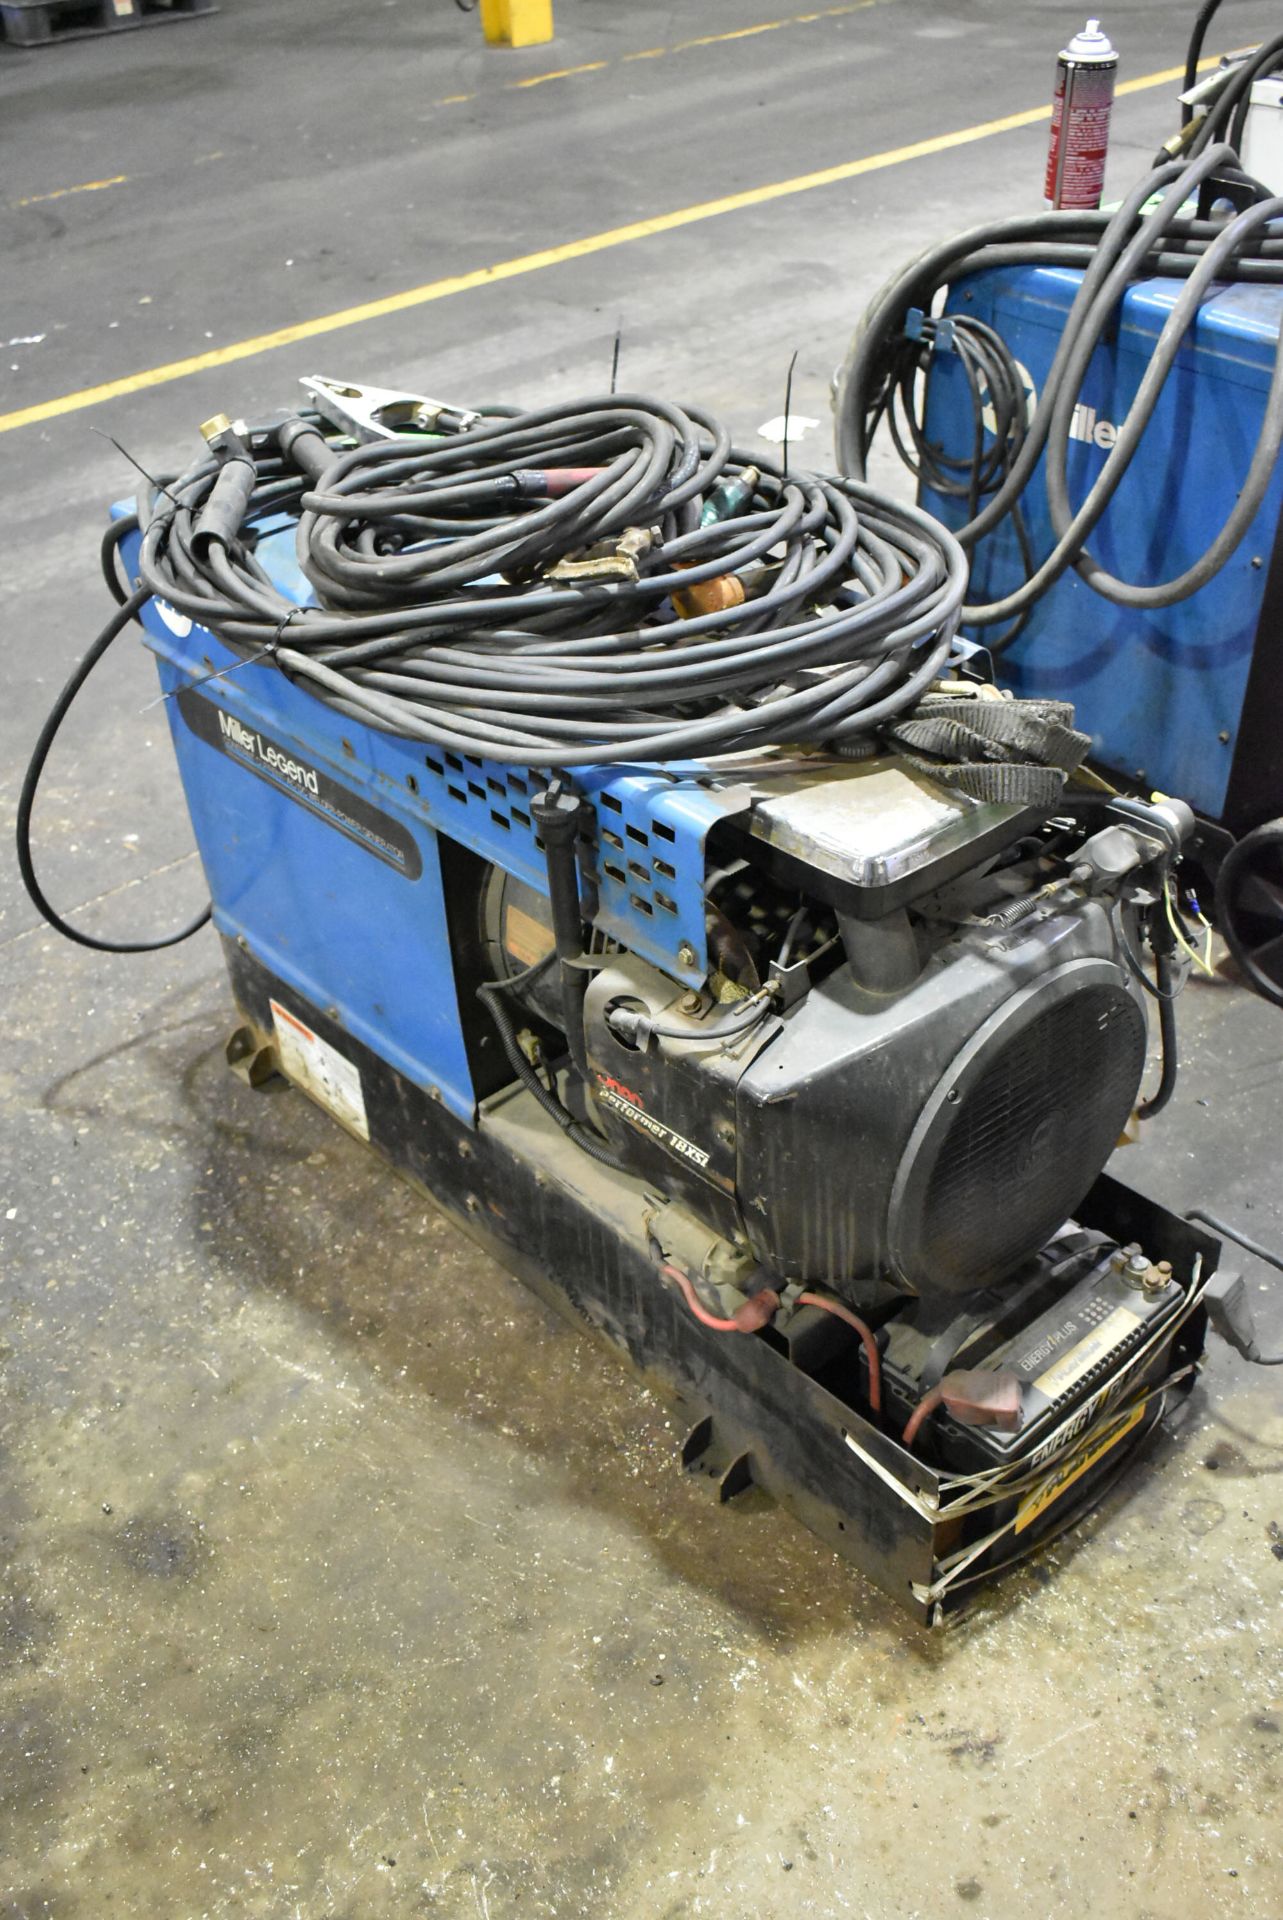 MILLER LEGEND GAS POWERED WELDER GENERATOR WITH ONAN PERFORMER 18XSI ENGINE, CABLES & GUN - Image 2 of 4